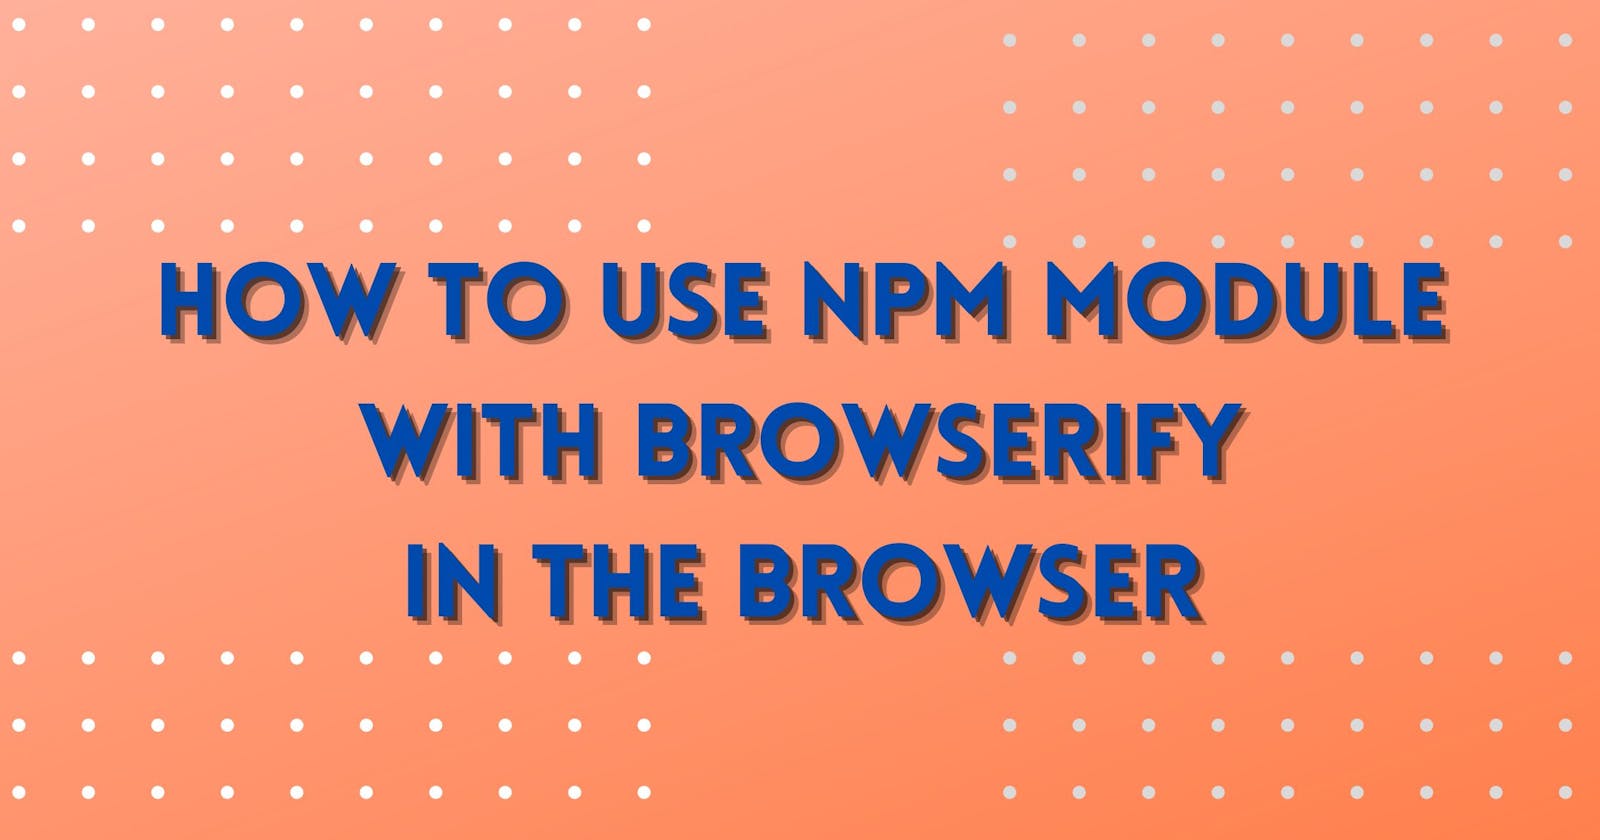 How to use any NPM module with Browserify in the browser